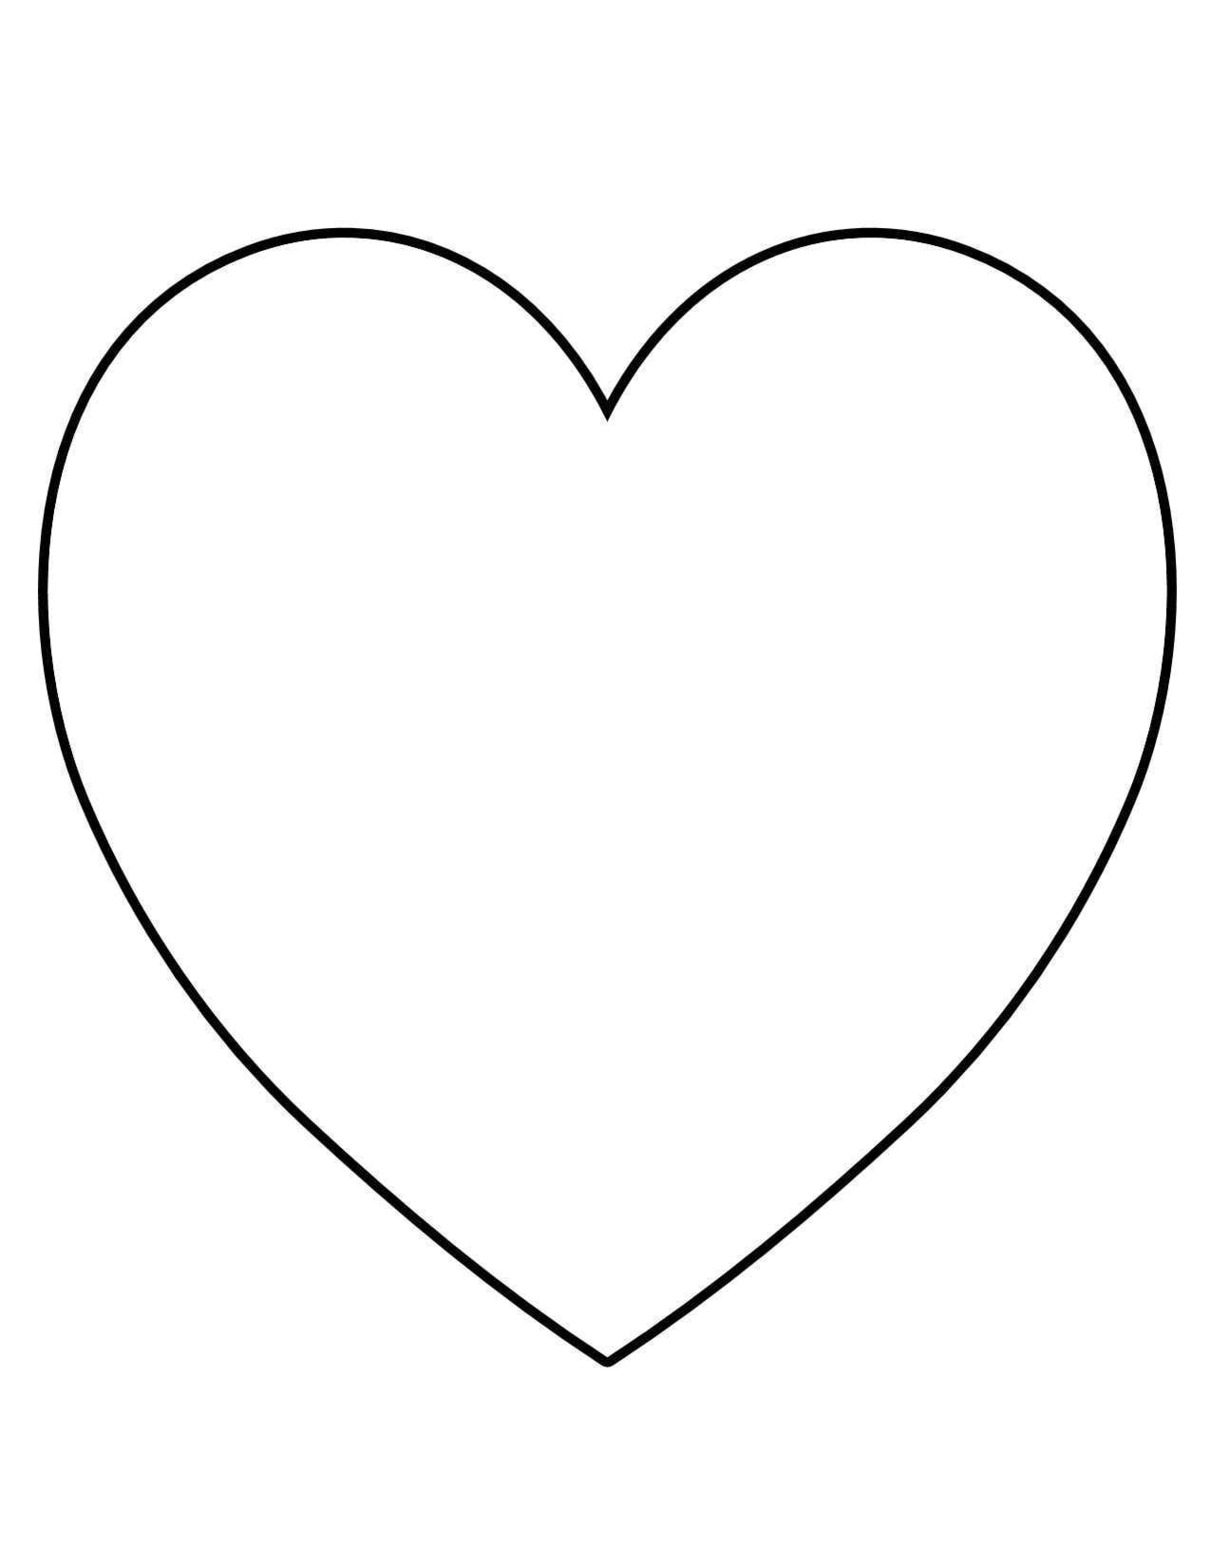 Heart Template Clipart - Free to use Clip Art Resource